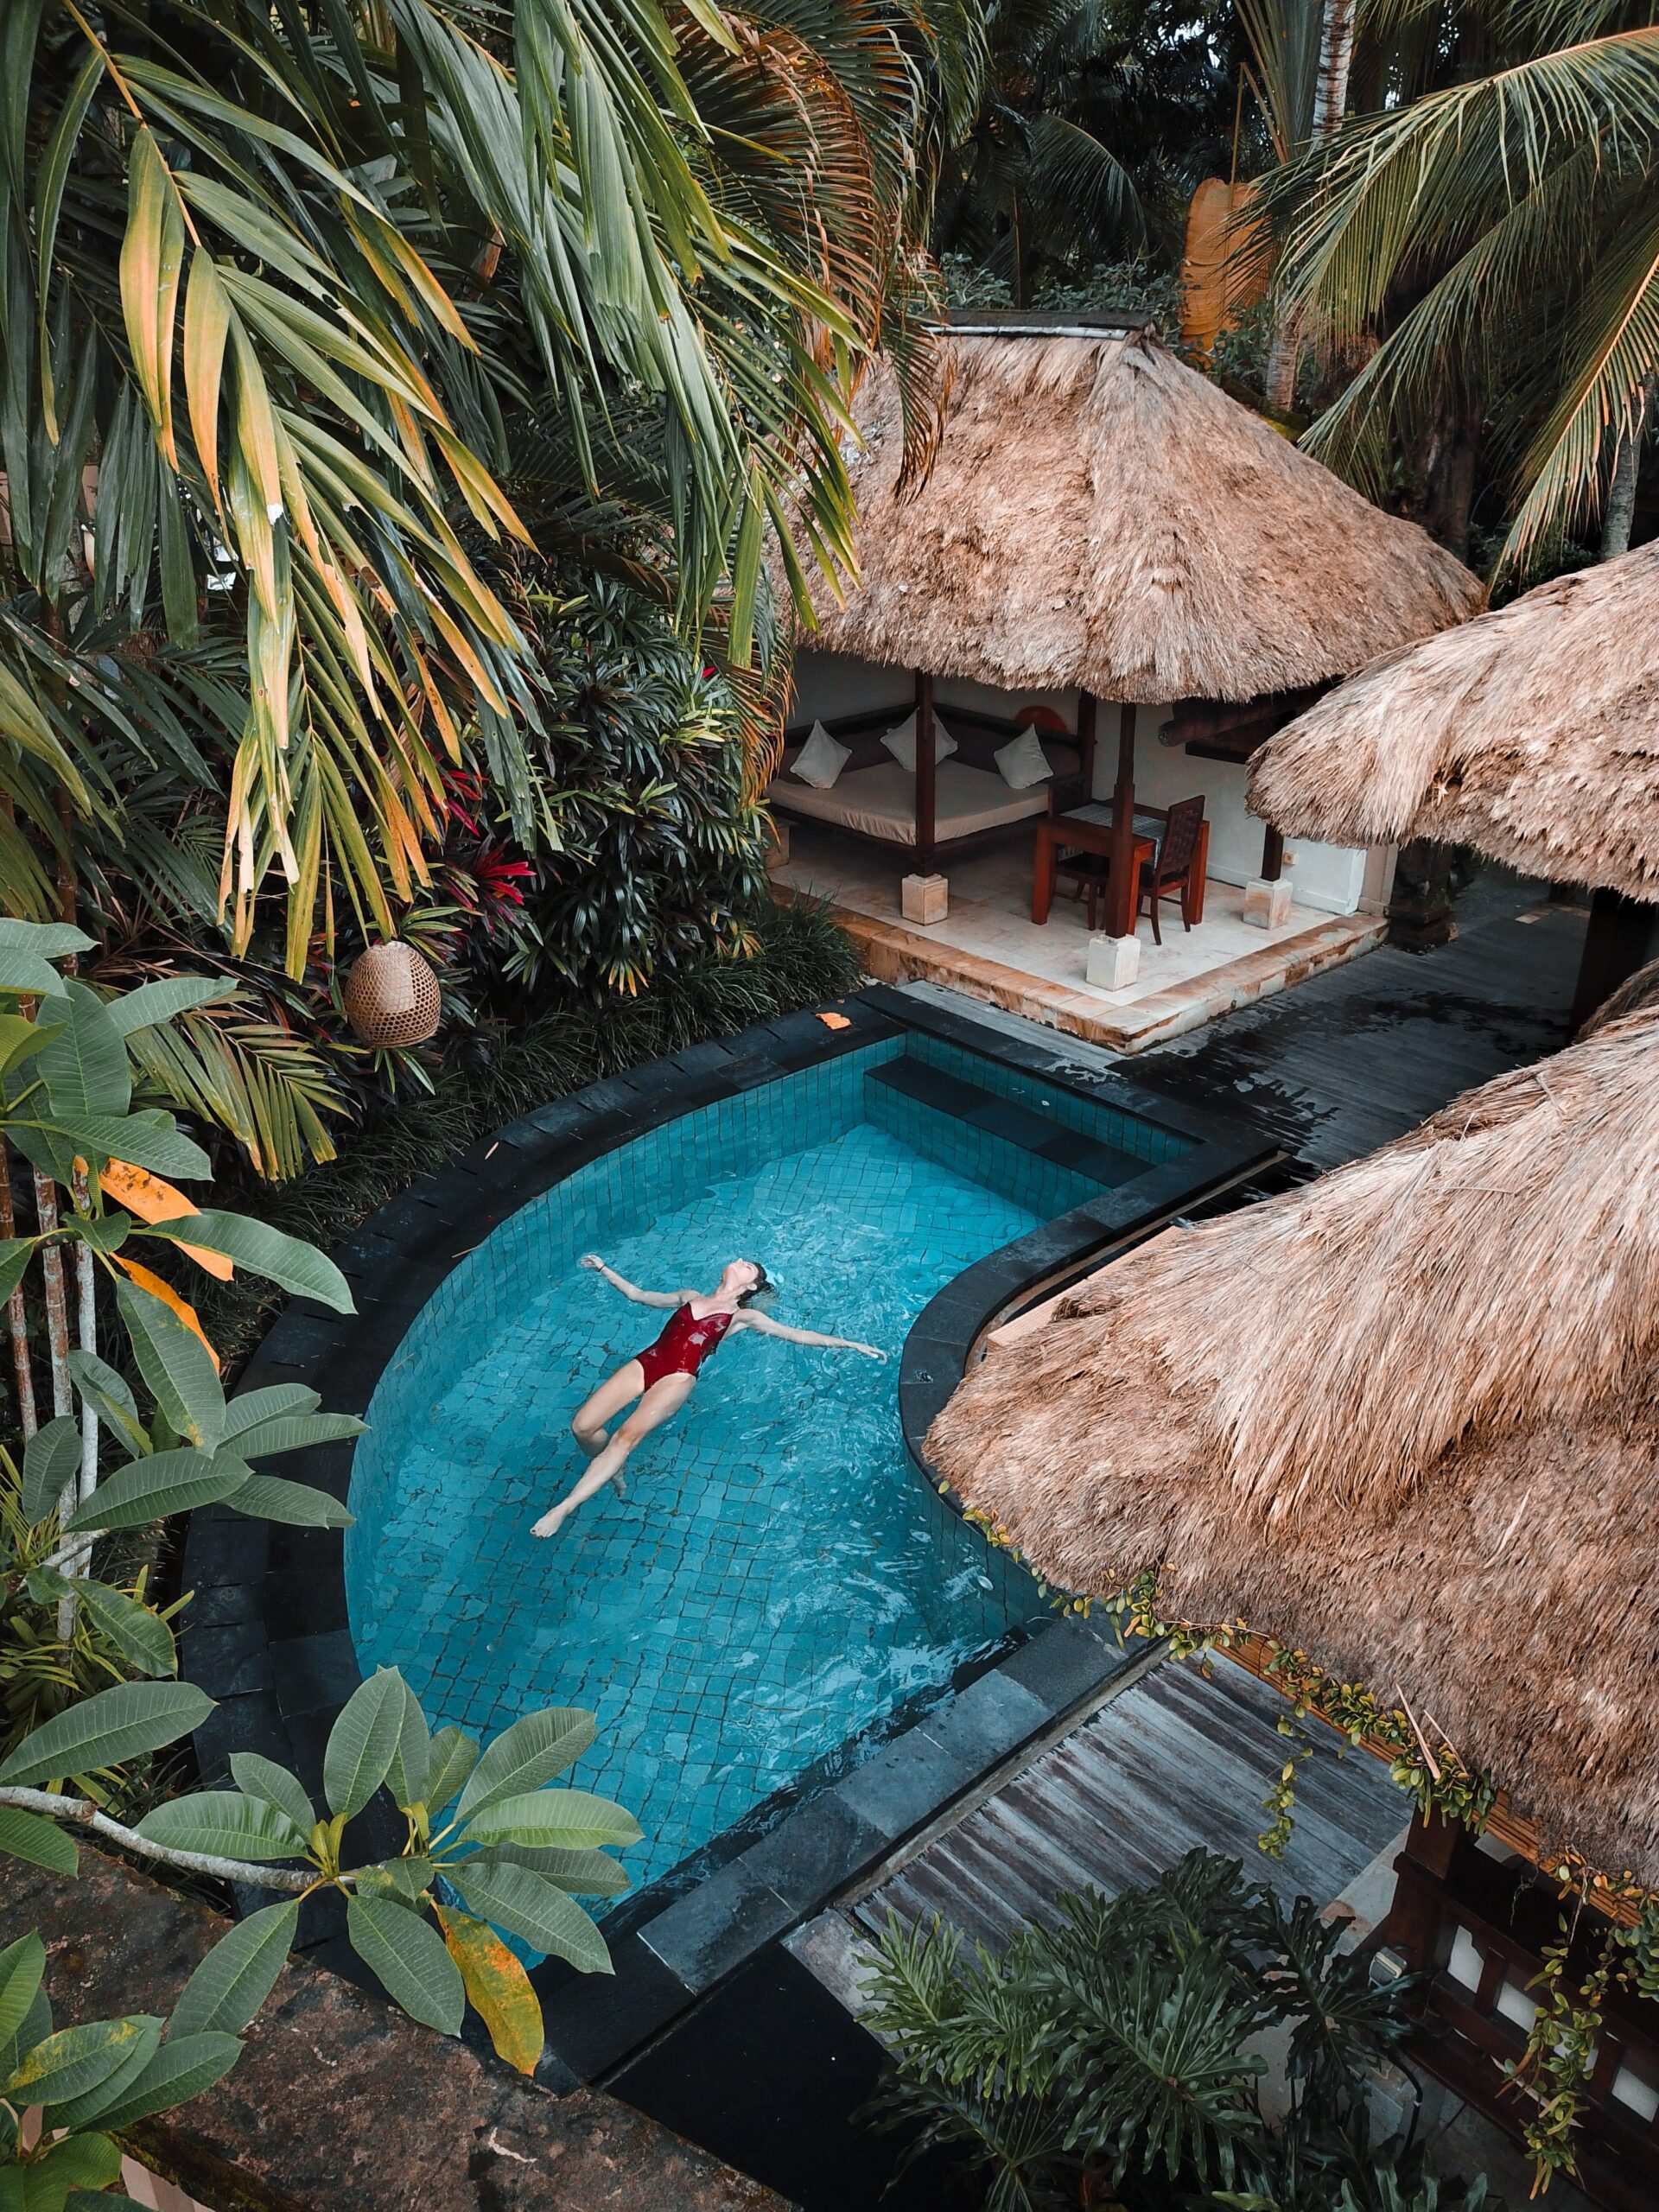 Bali Bucket List: Top 10 Exciting Things To Do in Bali